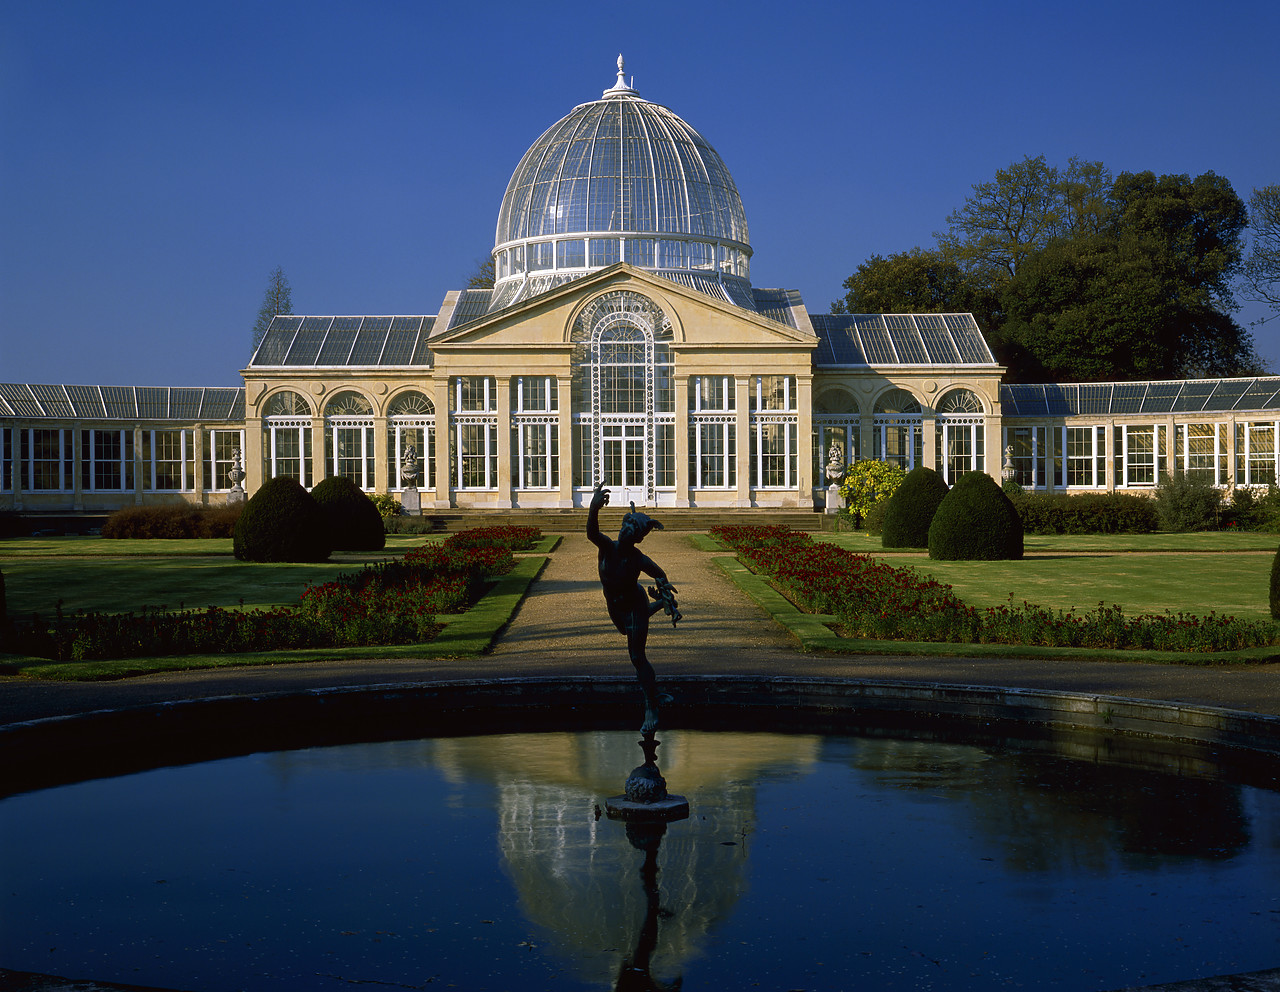 #902742-2 - Syon Park Conservatory, Brentford, Middlesex, England